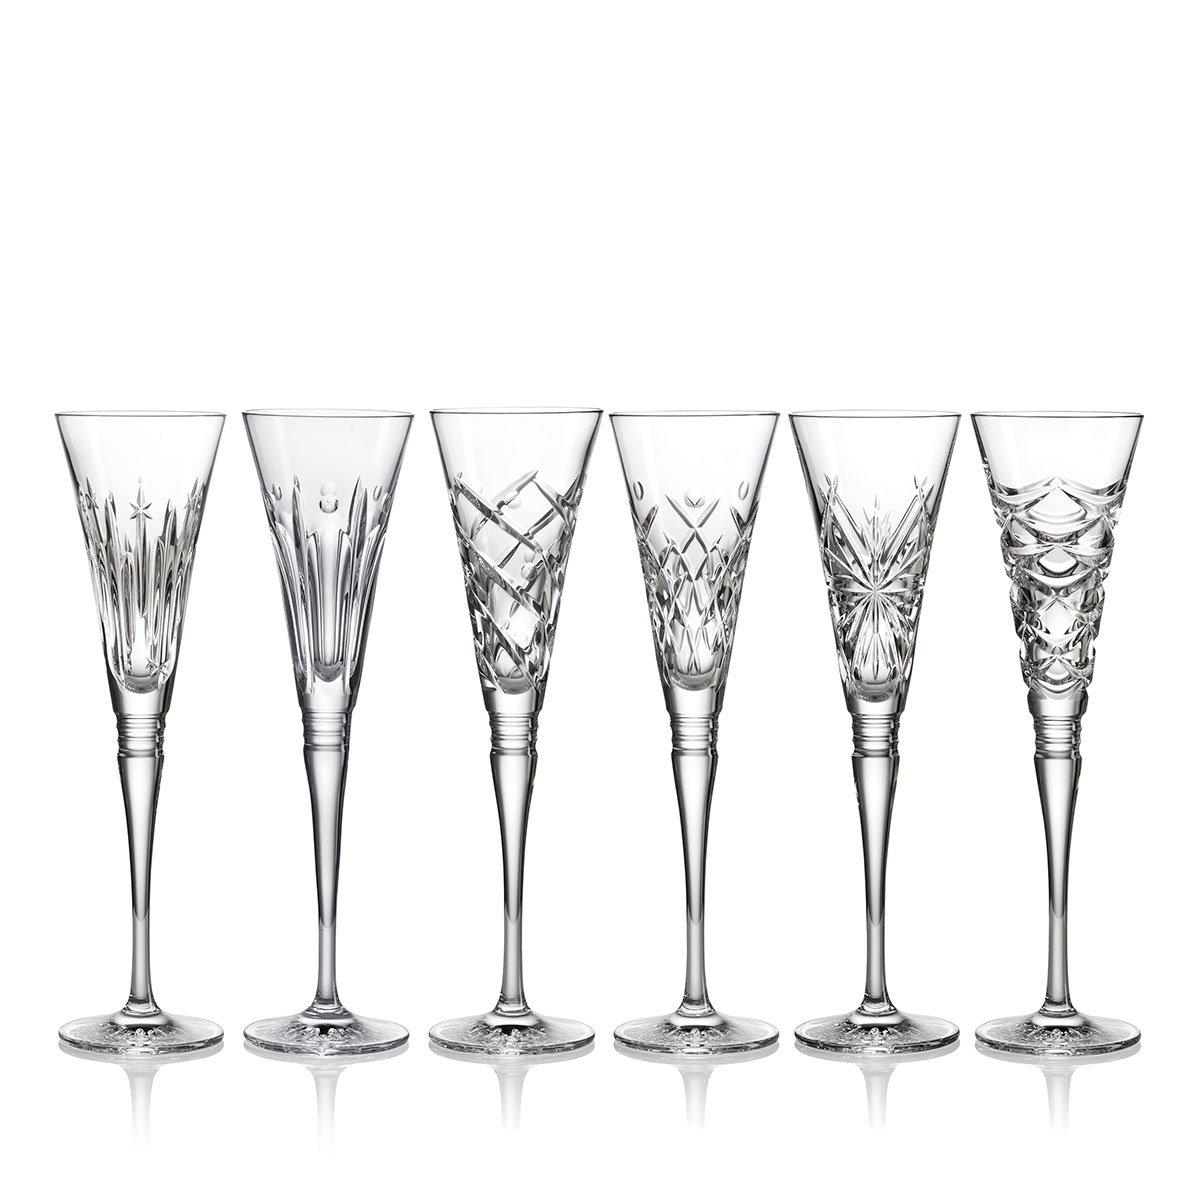 Waterford Crystal Winter Wonders Flutes Clear Mixed Set of 6